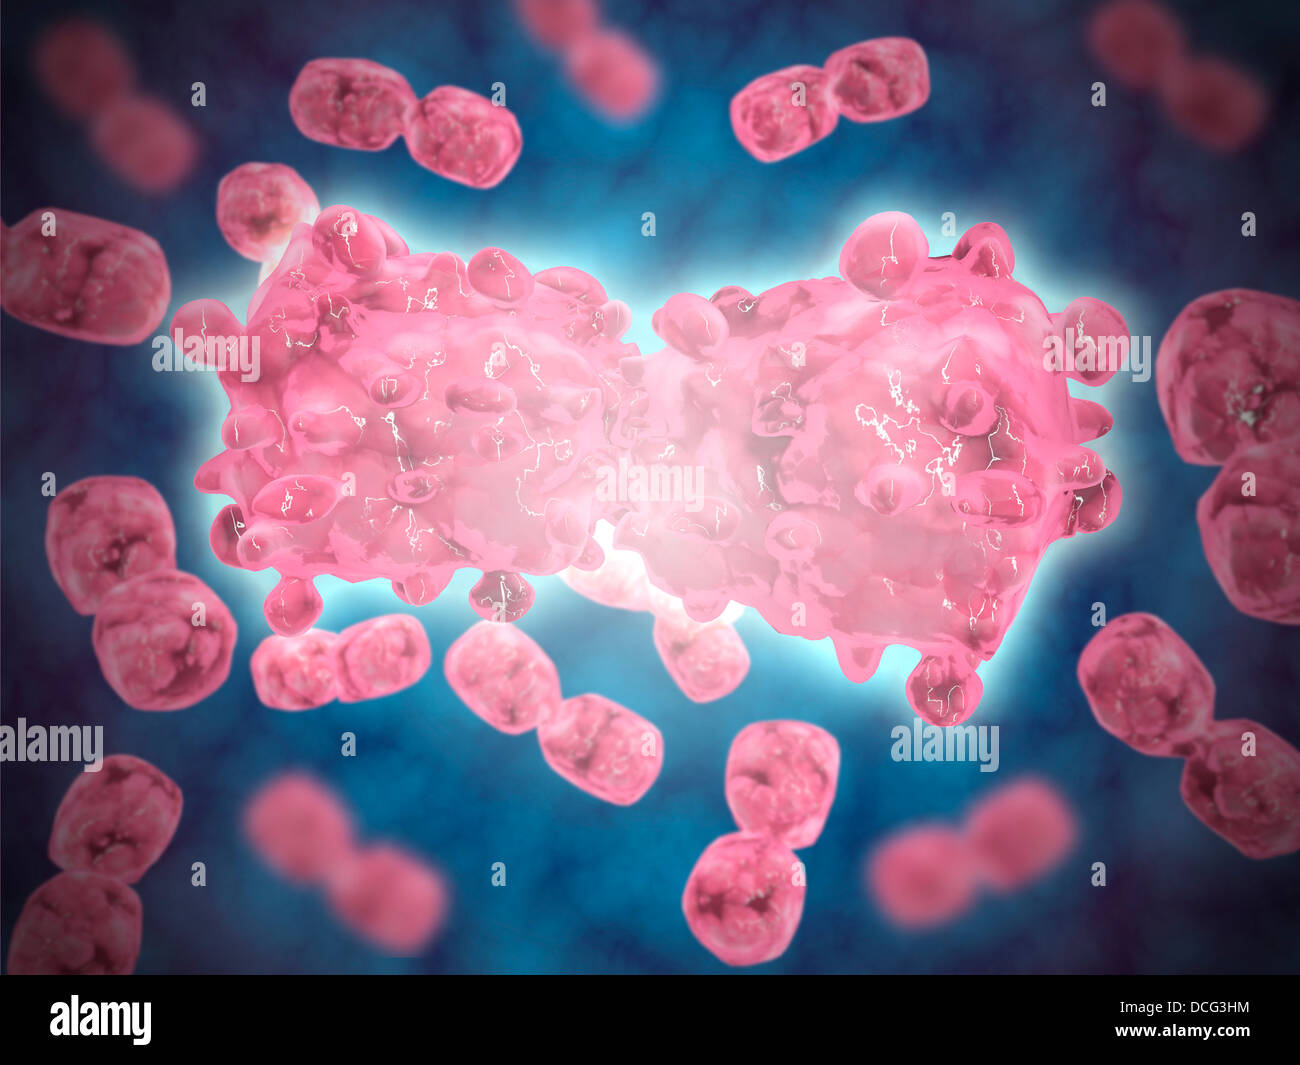 Microscopic view of a group of leukemia cell. Stock Photo